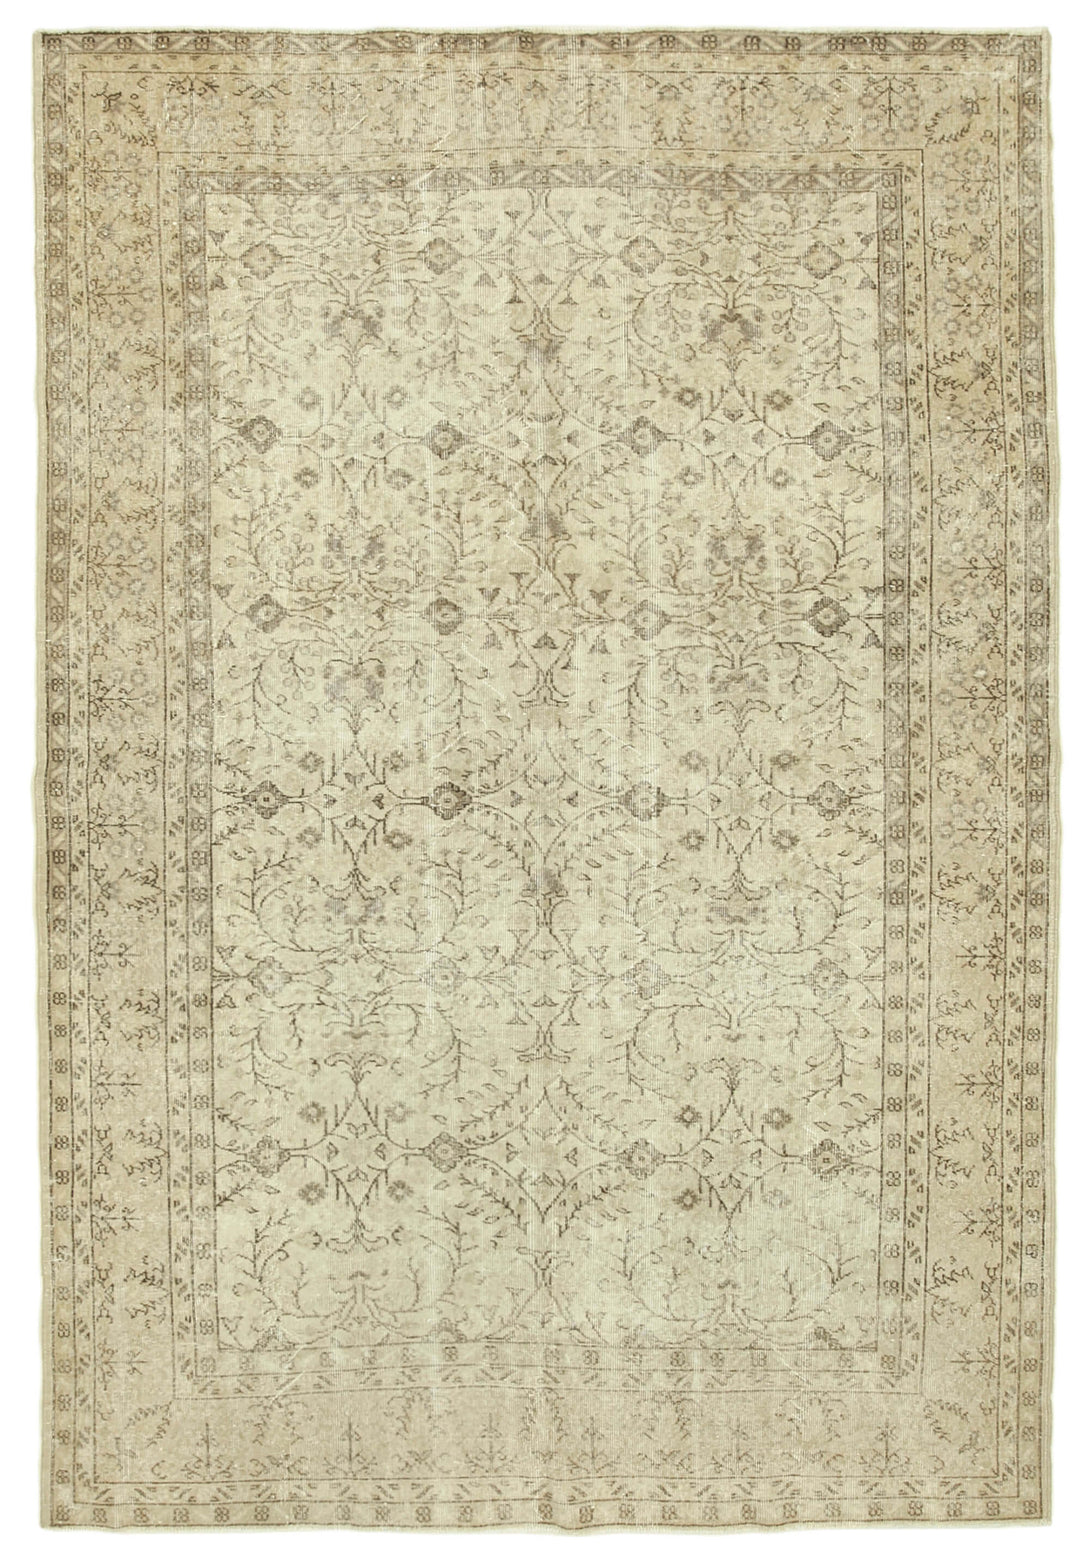 Handmade White Wash Area Rug > Design# OL-AC-38860 > Size: 6'-10" x 10'-3", Carpet Culture Rugs, Handmade Rugs, NYC Rugs, New Rugs, Shop Rugs, Rug Store, Outlet Rugs, SoHo Rugs, Rugs in USA